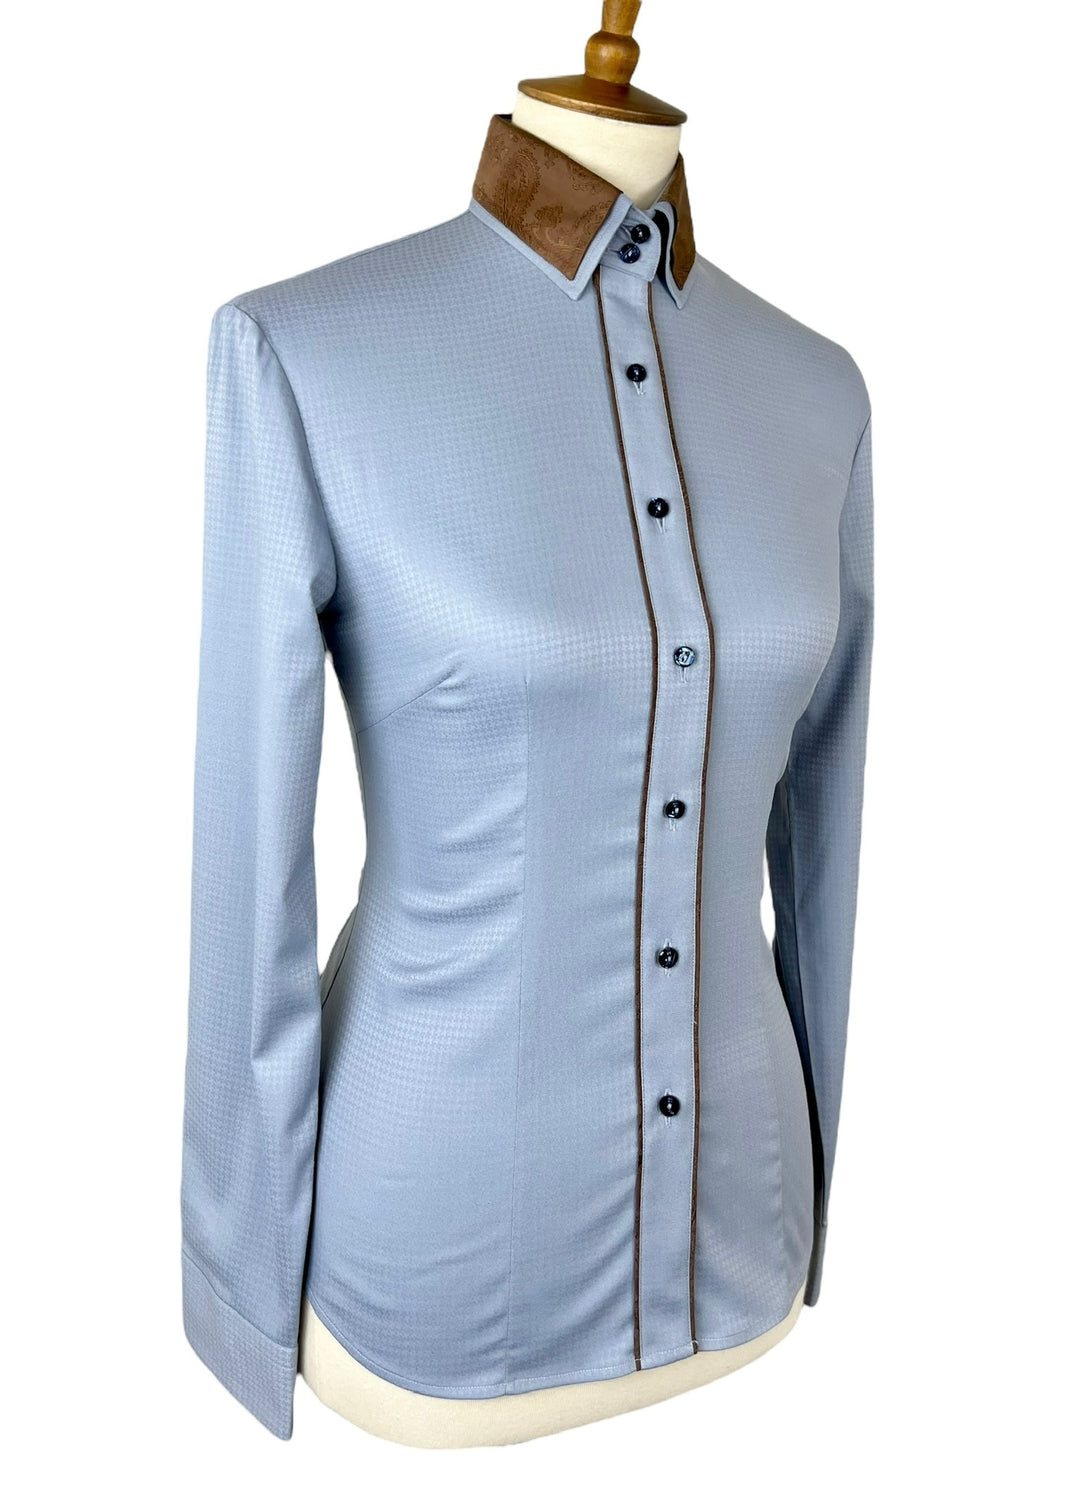 The Donna Western Shirt (Size 32) - Ref. 140